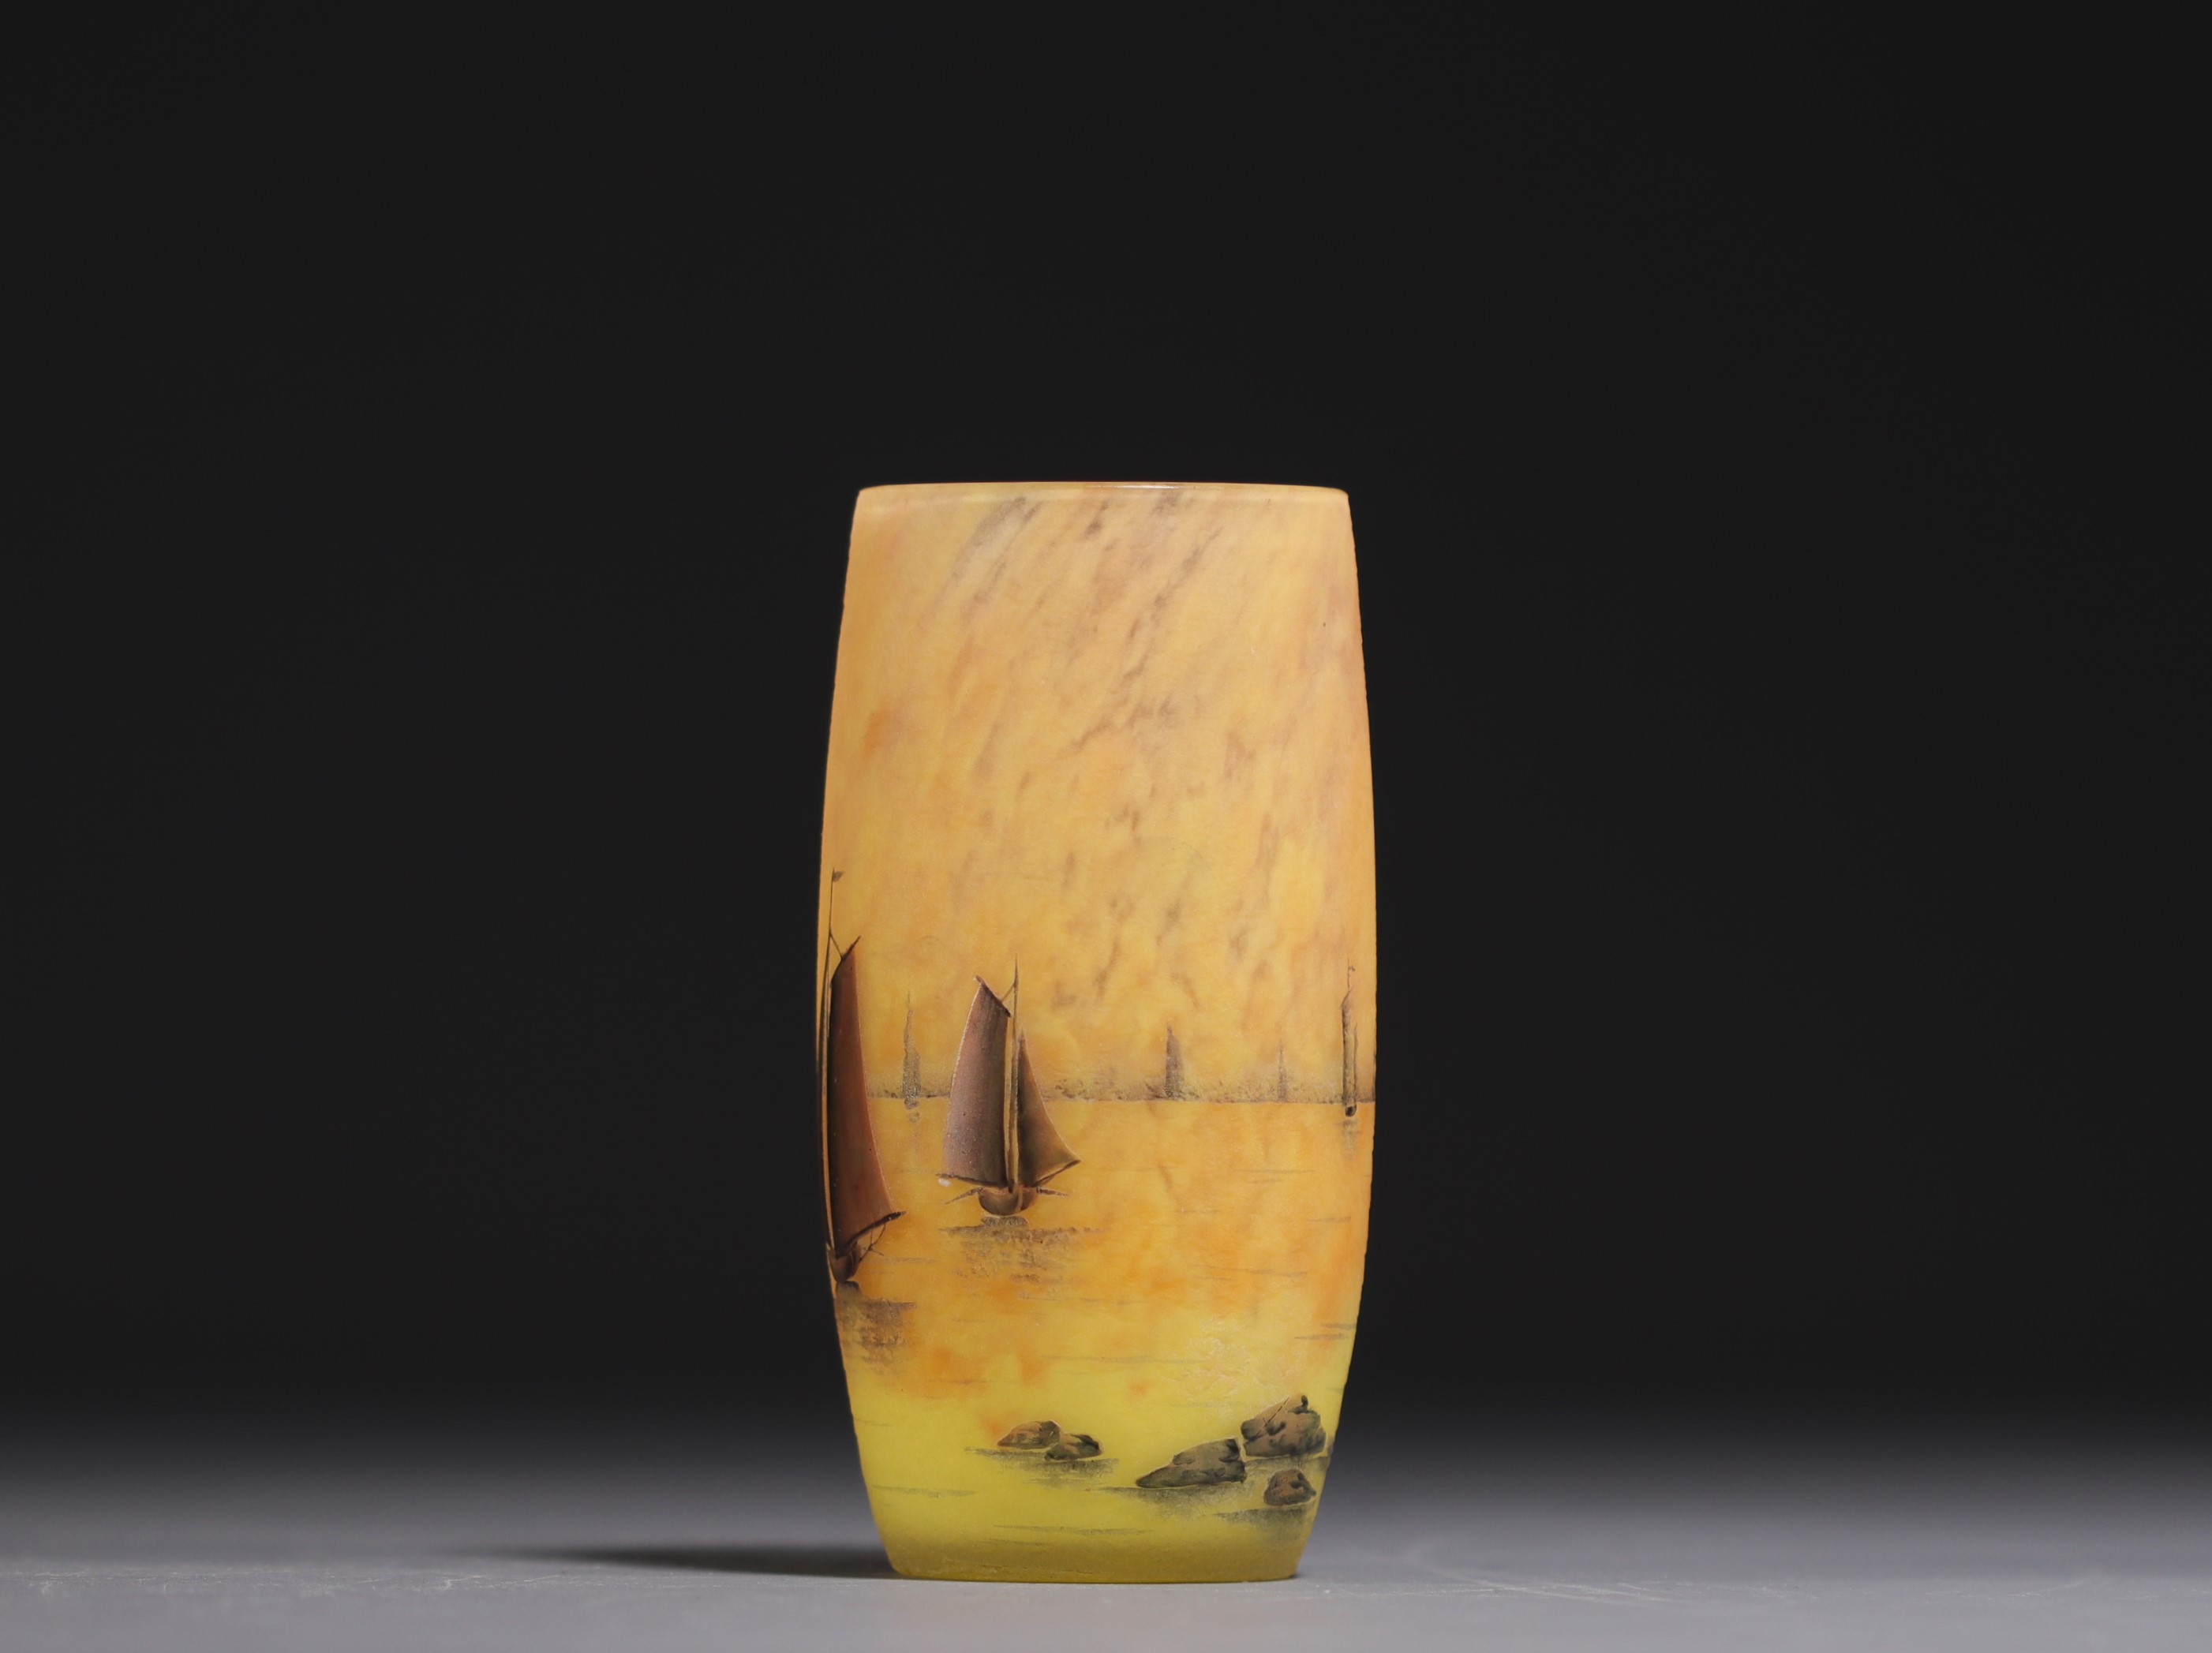 DAUM Nancy - Small shaded and enamelled glass vase with sailboats design, signed under the base. - Image 4 of 5